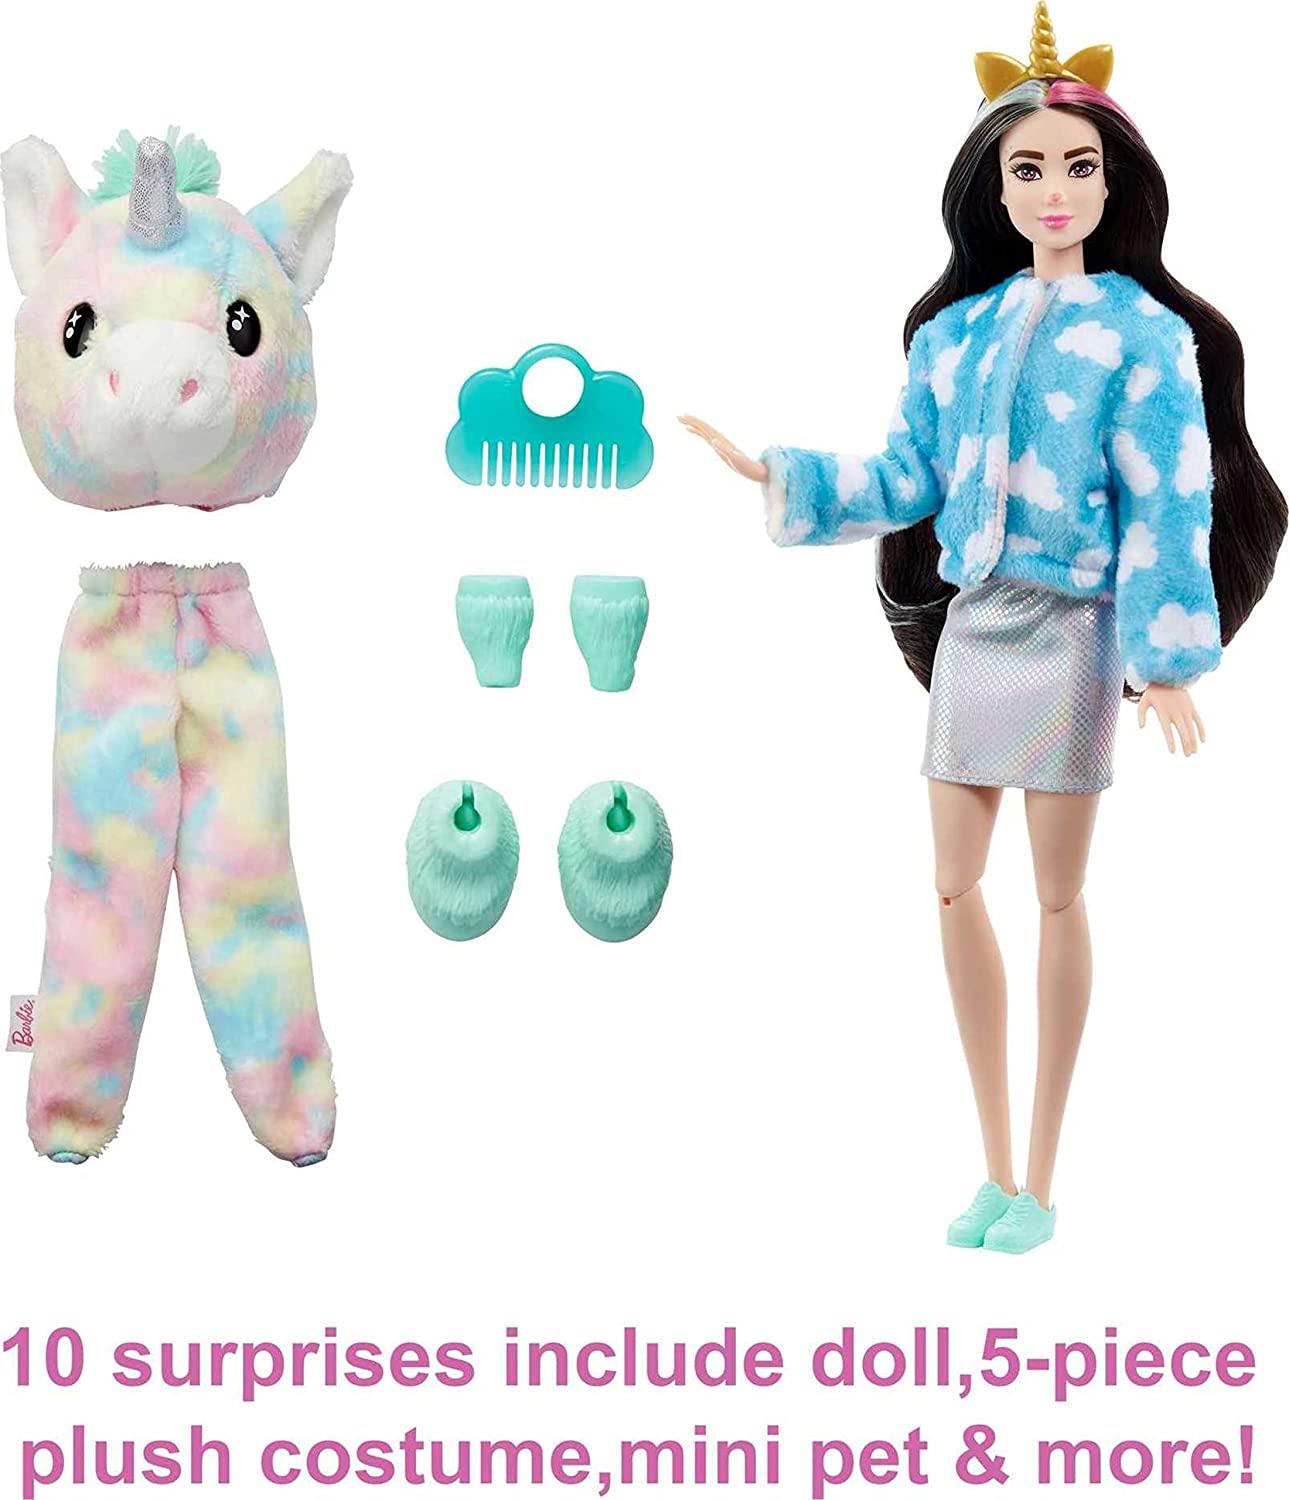 Barbie Cutie Reveal Doll with Unicorn Plush by Barbie - The Magic Toy Shop